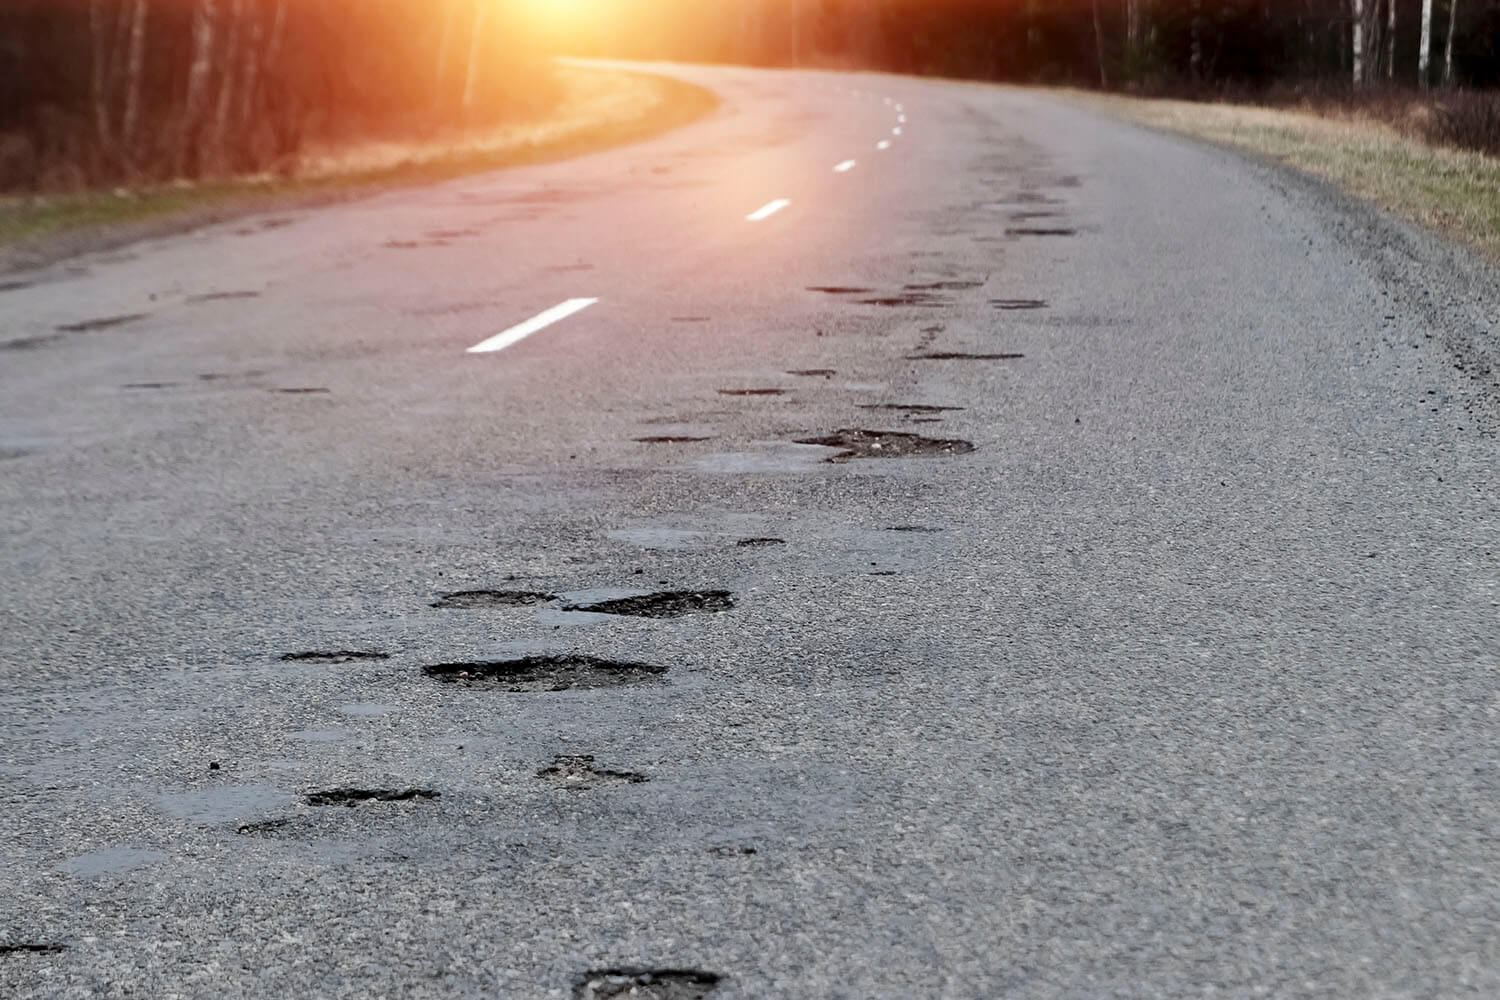 The,Road,In,Disrepair,With,A,Lot,Of,Potholes.,Cars